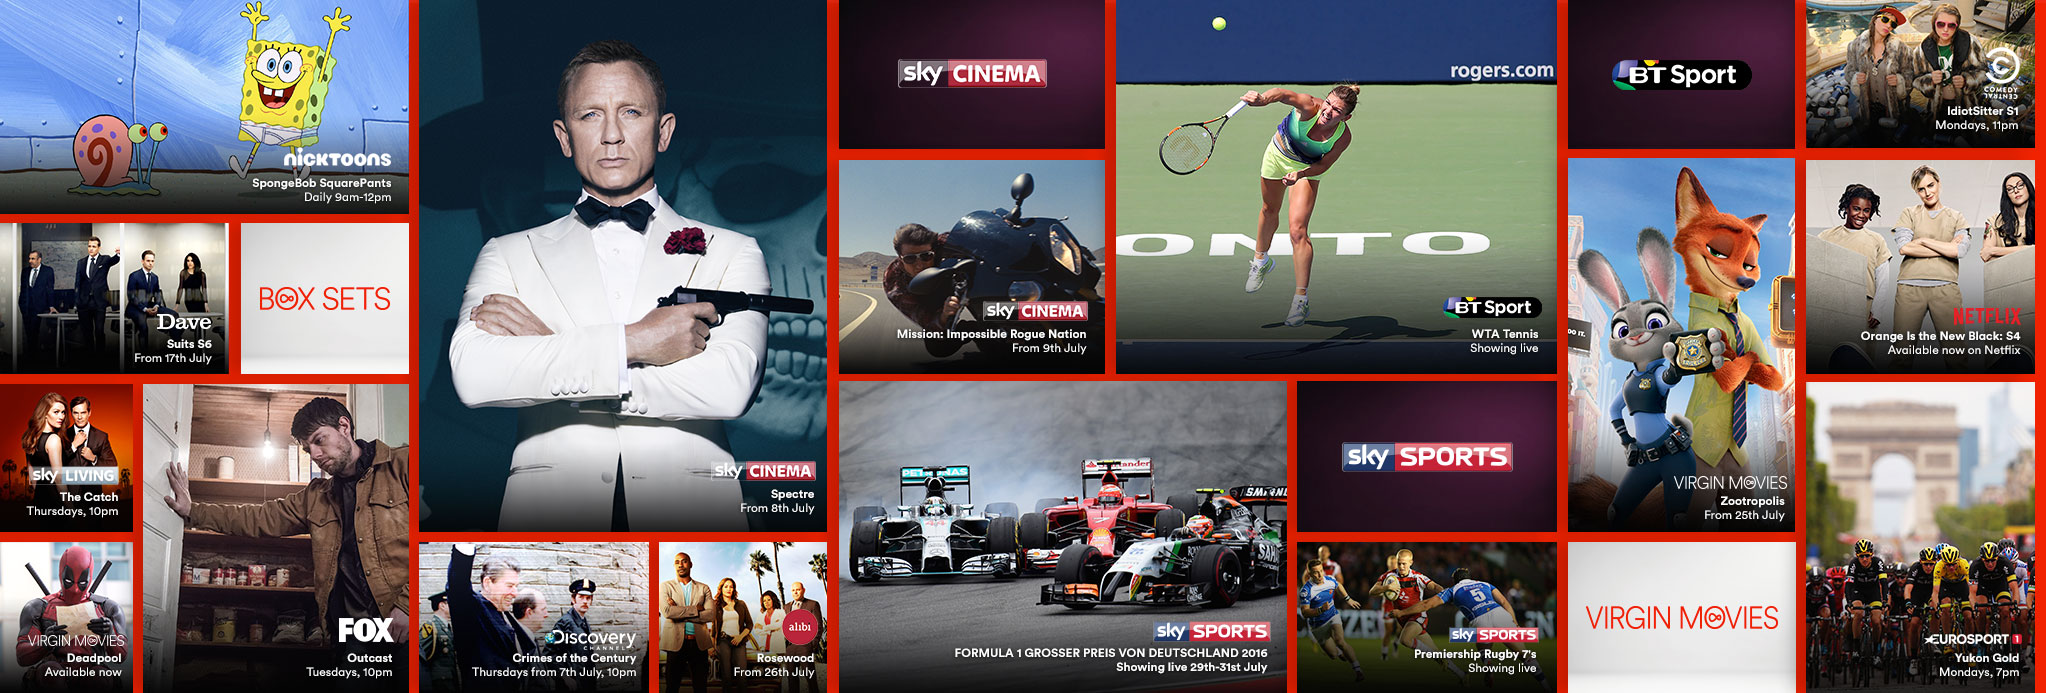 Gallery showing the live TV, catch up and on demand shows available with VIP